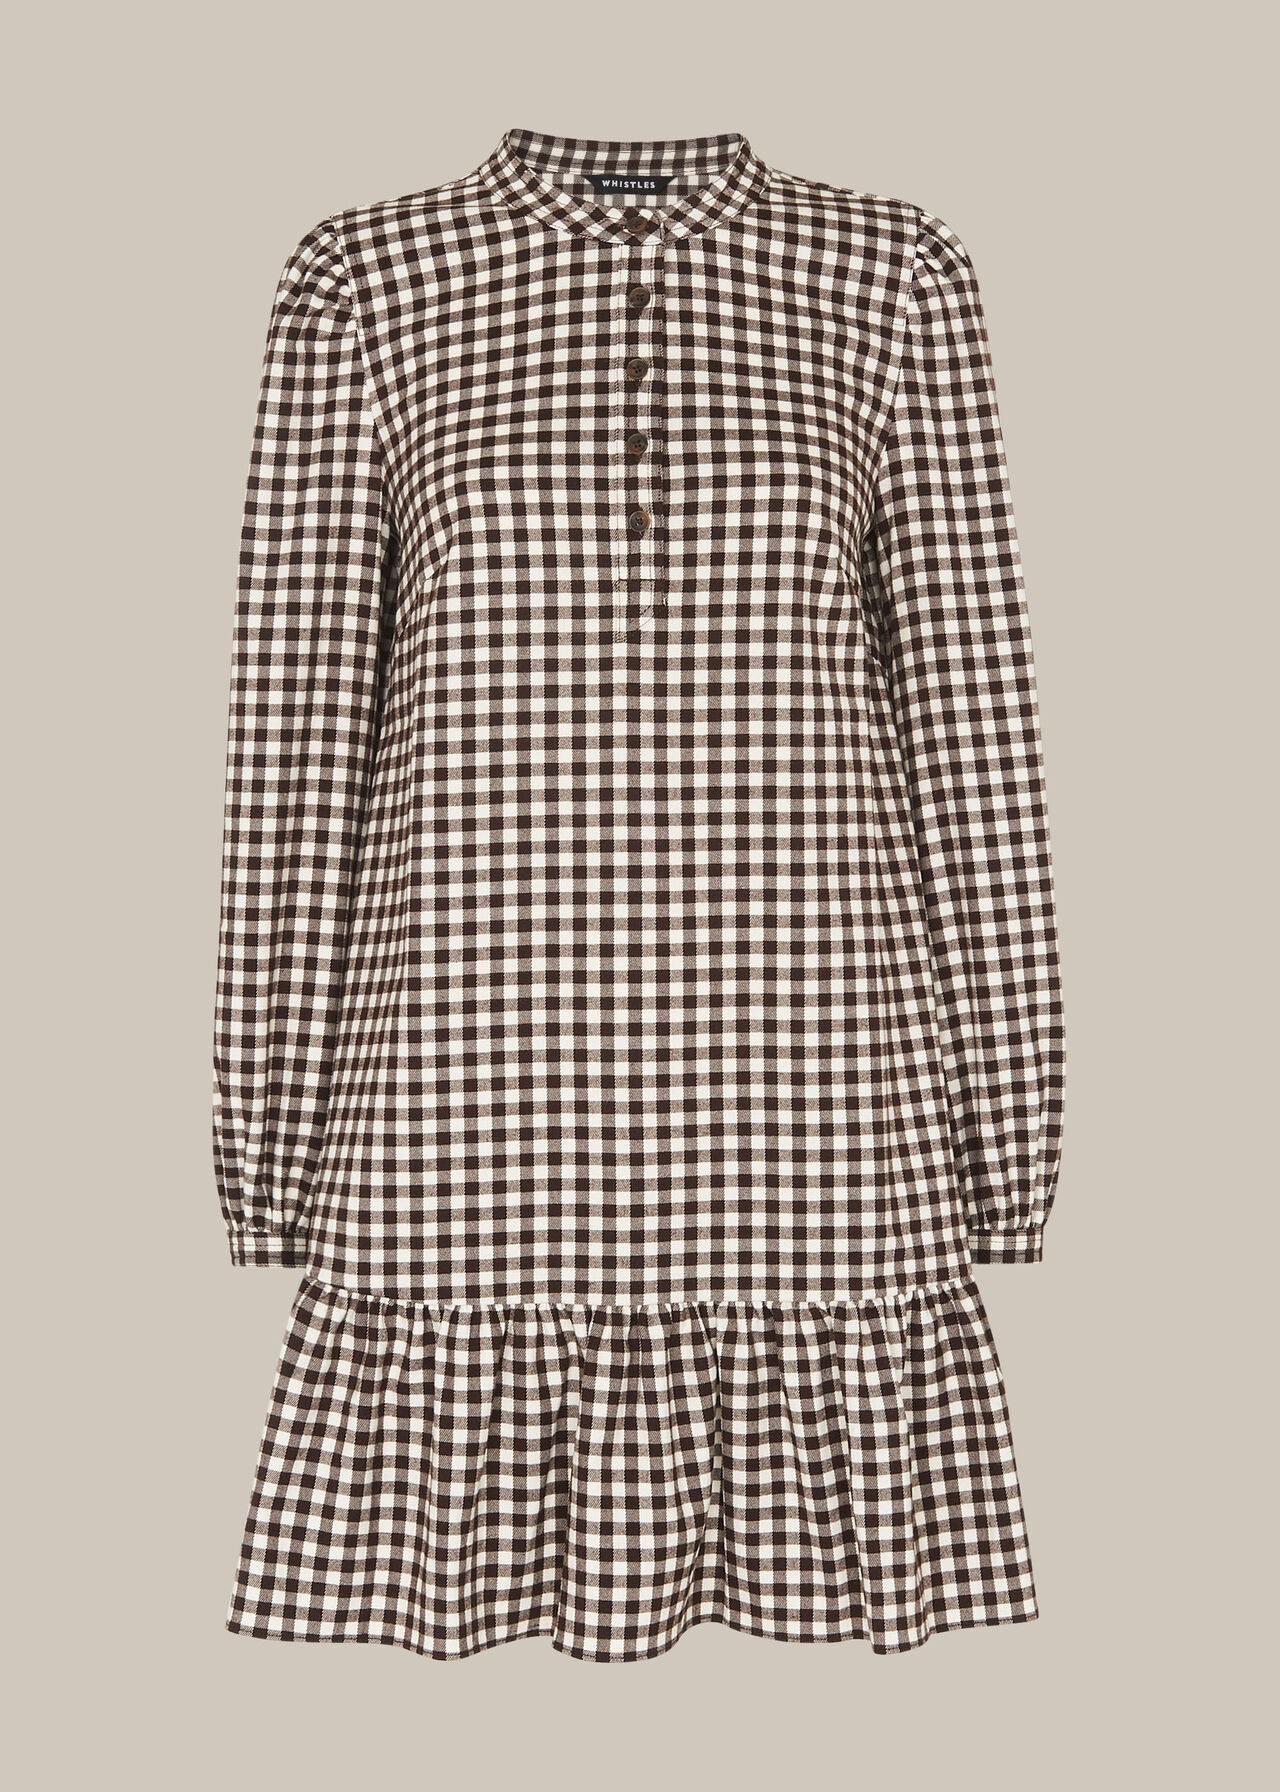 19+ Brown And White Gingham Dress